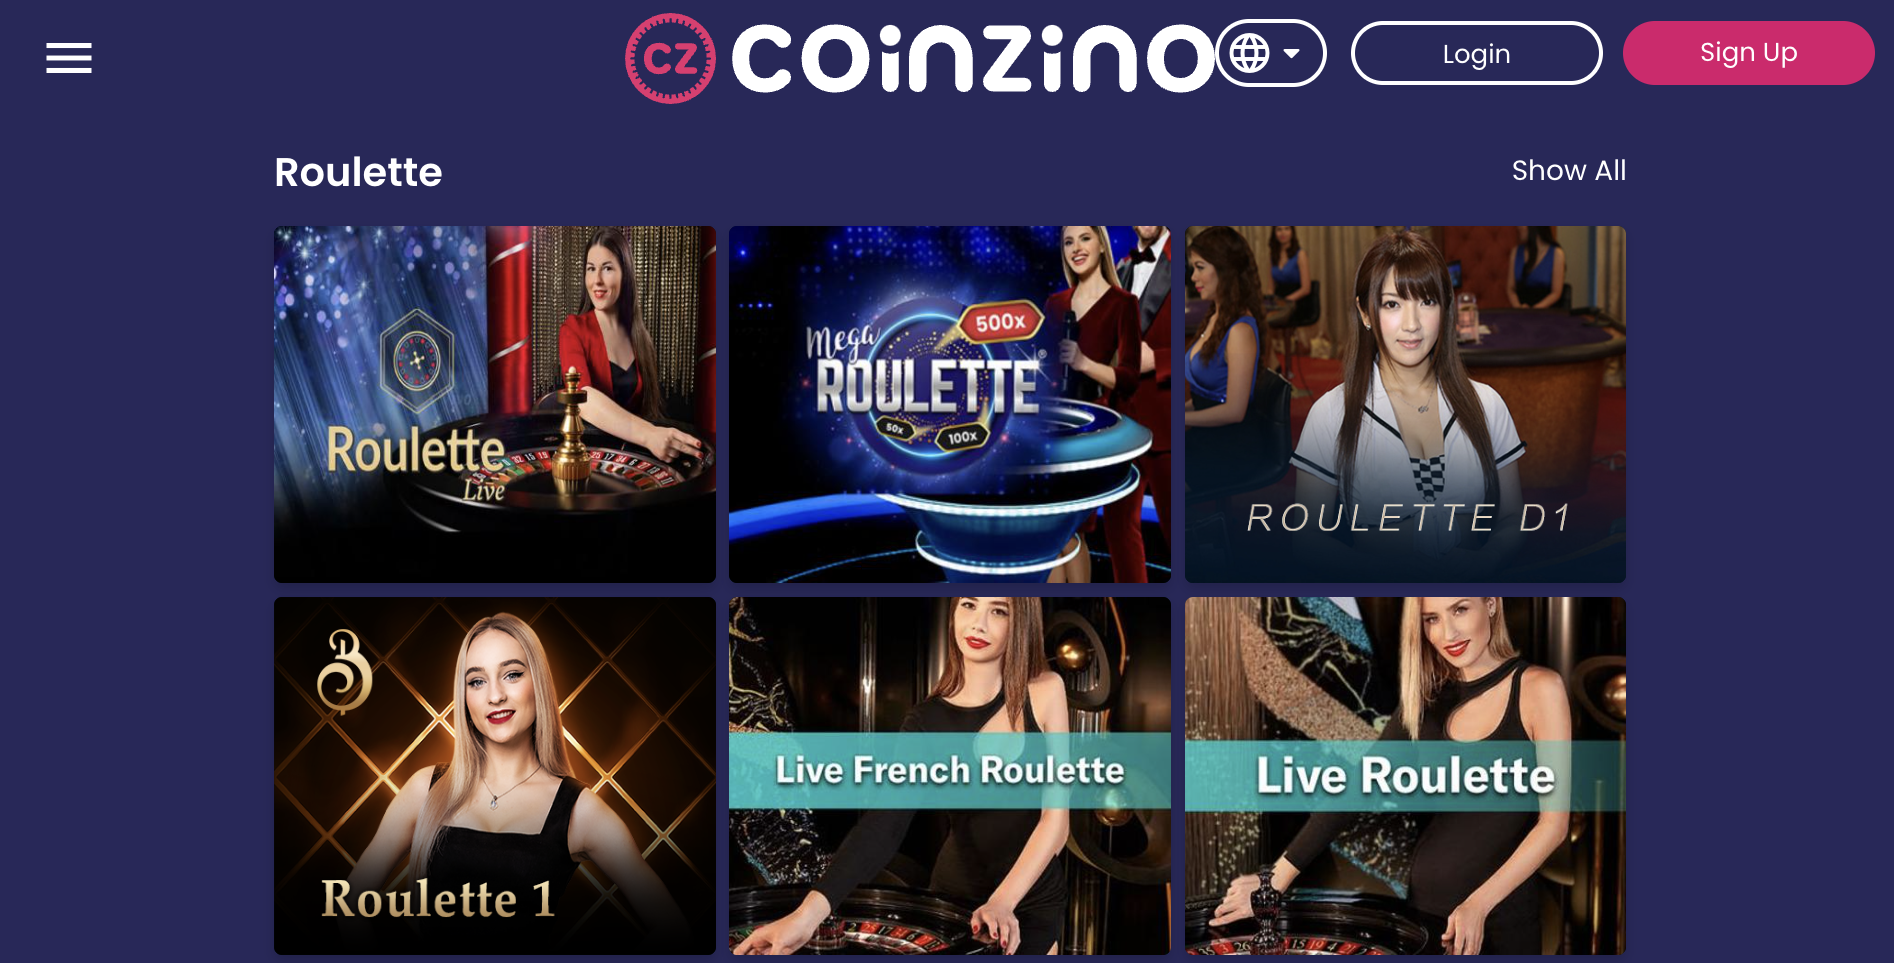 Coinzino Roulette Games Available